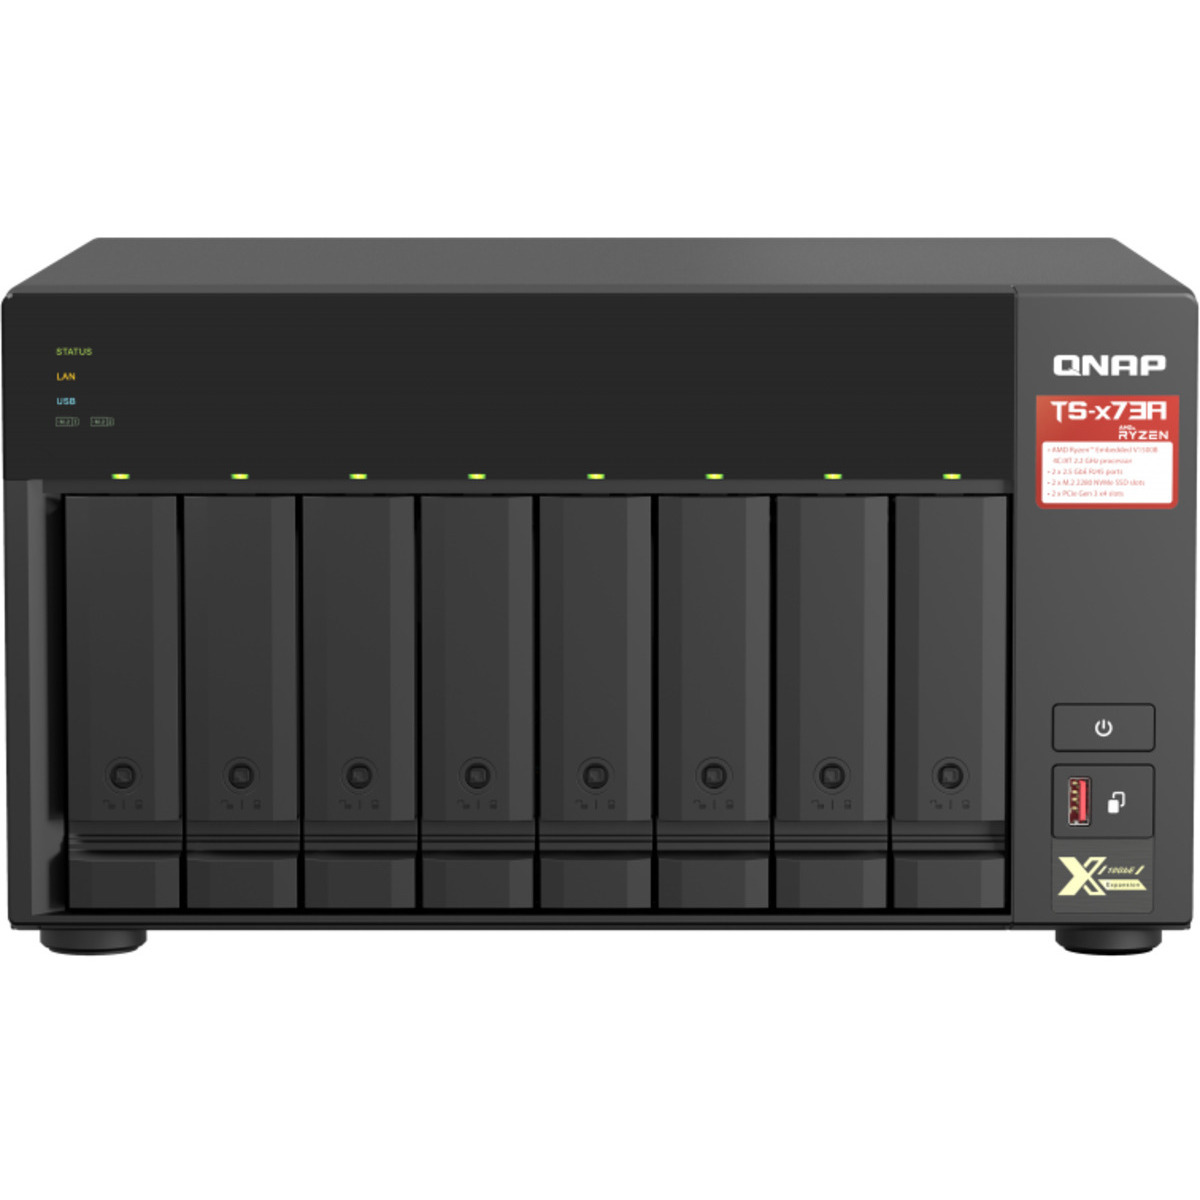 QNAP TS-873A 60tb 8-Bay Desktop Multimedia / Power User / Business NAS - Network Attached Storage Device 6x10tb Seagate IronWolf Pro ST10000NT001 3.5 7200rpm SATA 6Gb/s HDD NAS Class Drives Installed - Burn-In Tested - ON SALE TS-873A